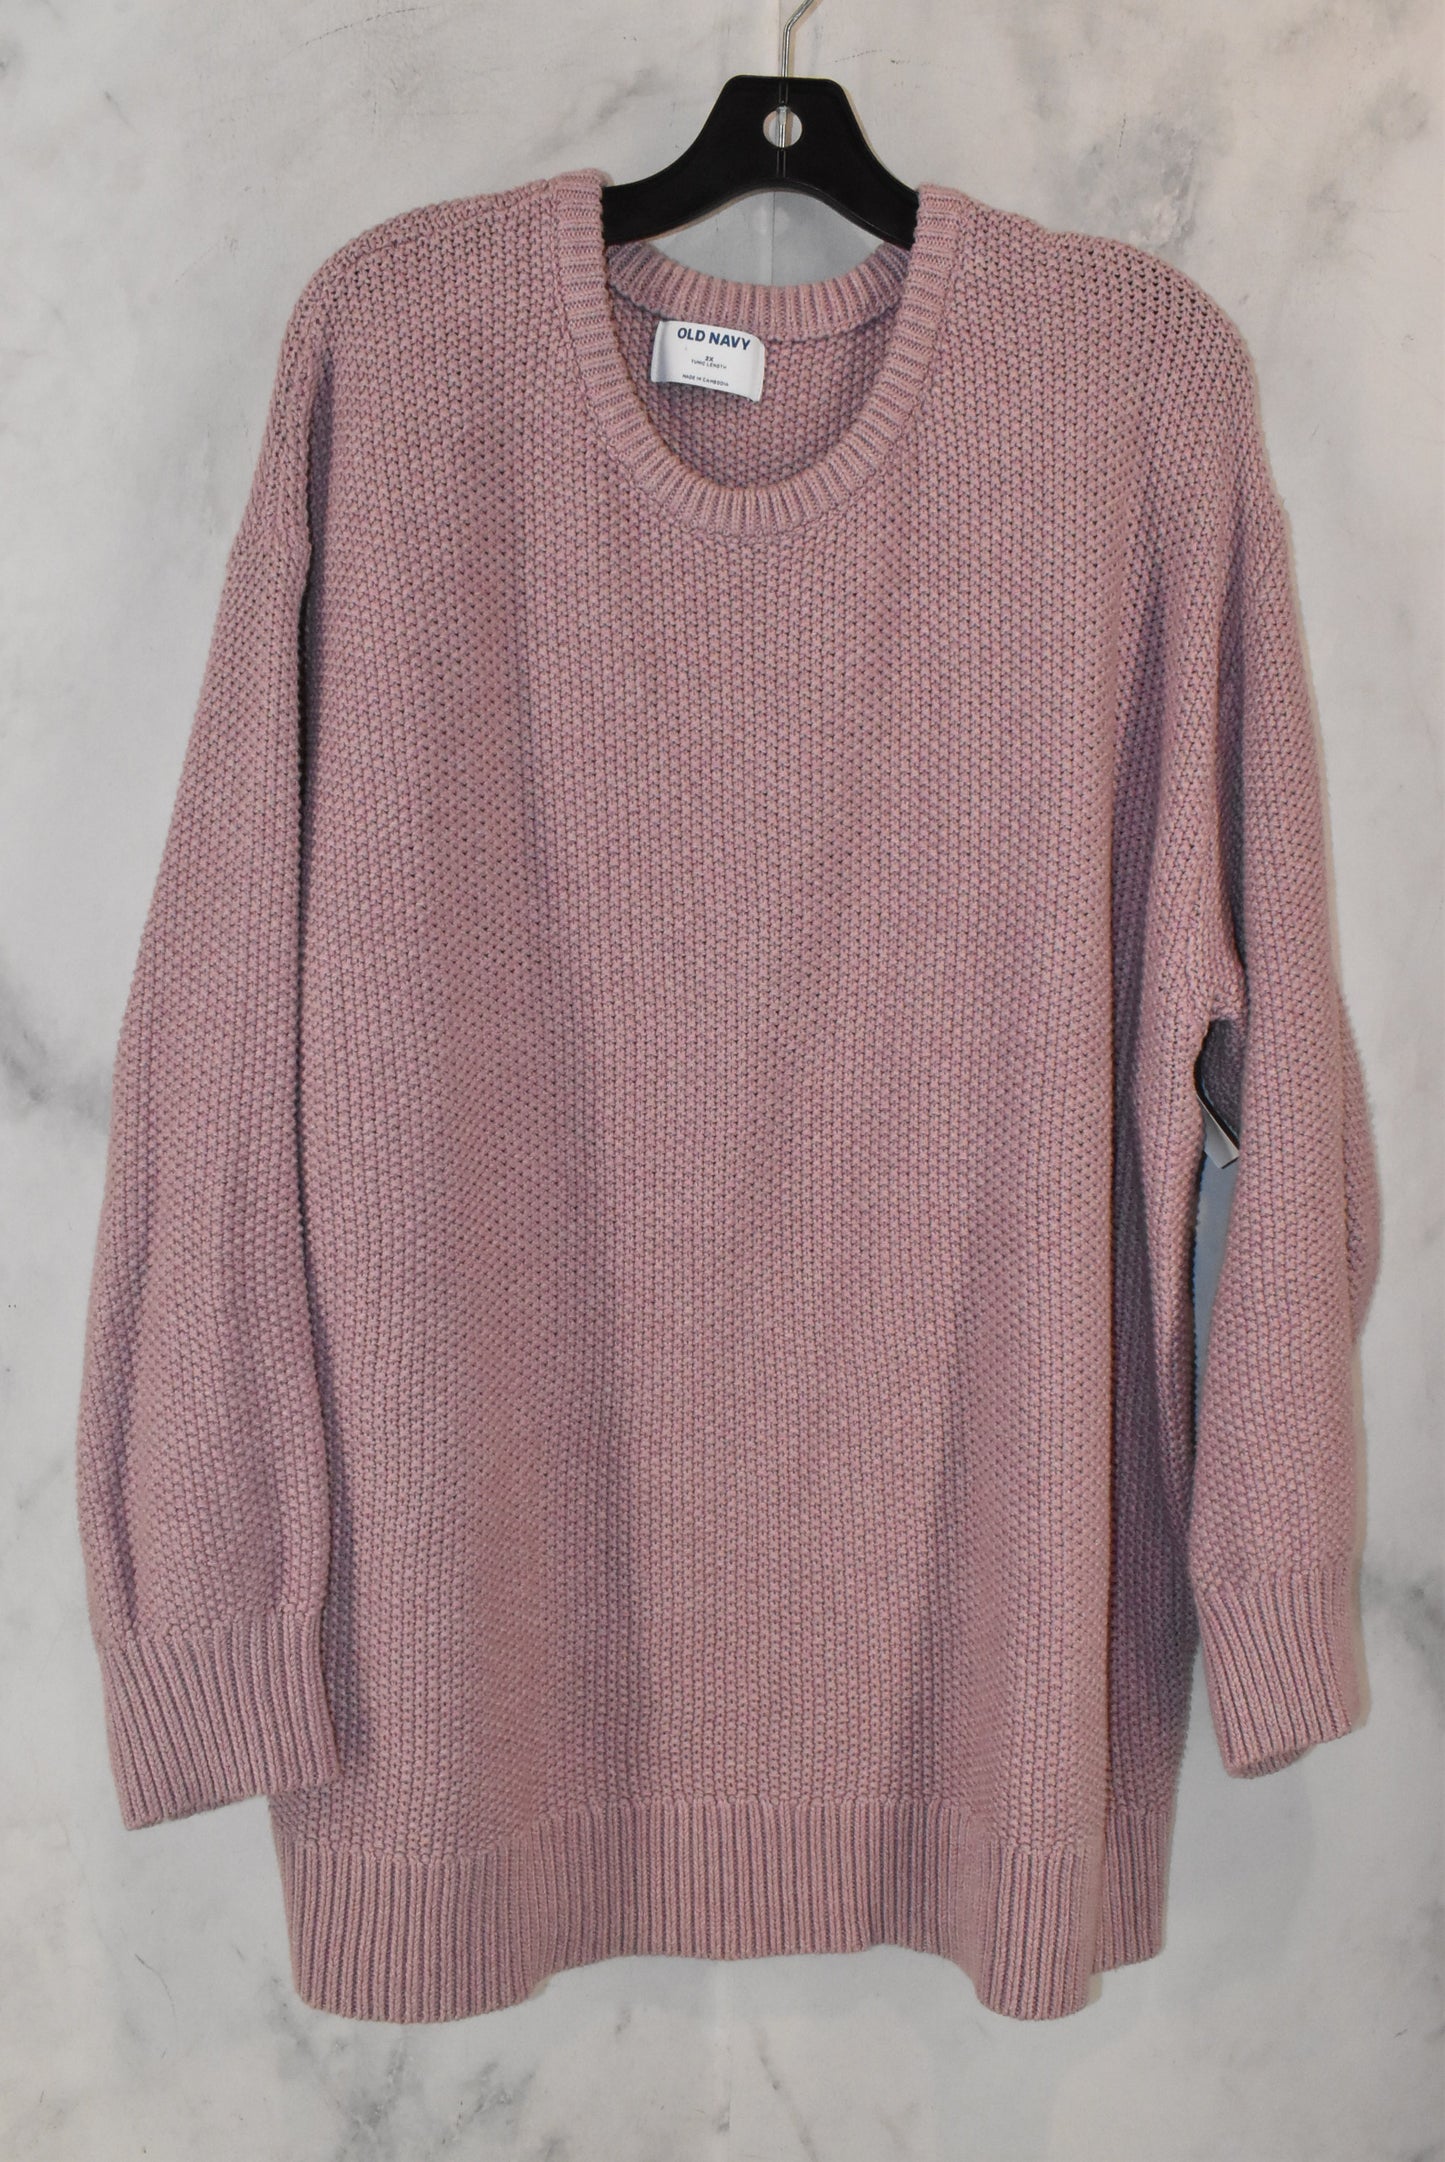 Sweater By Old Navy  Size: 2x